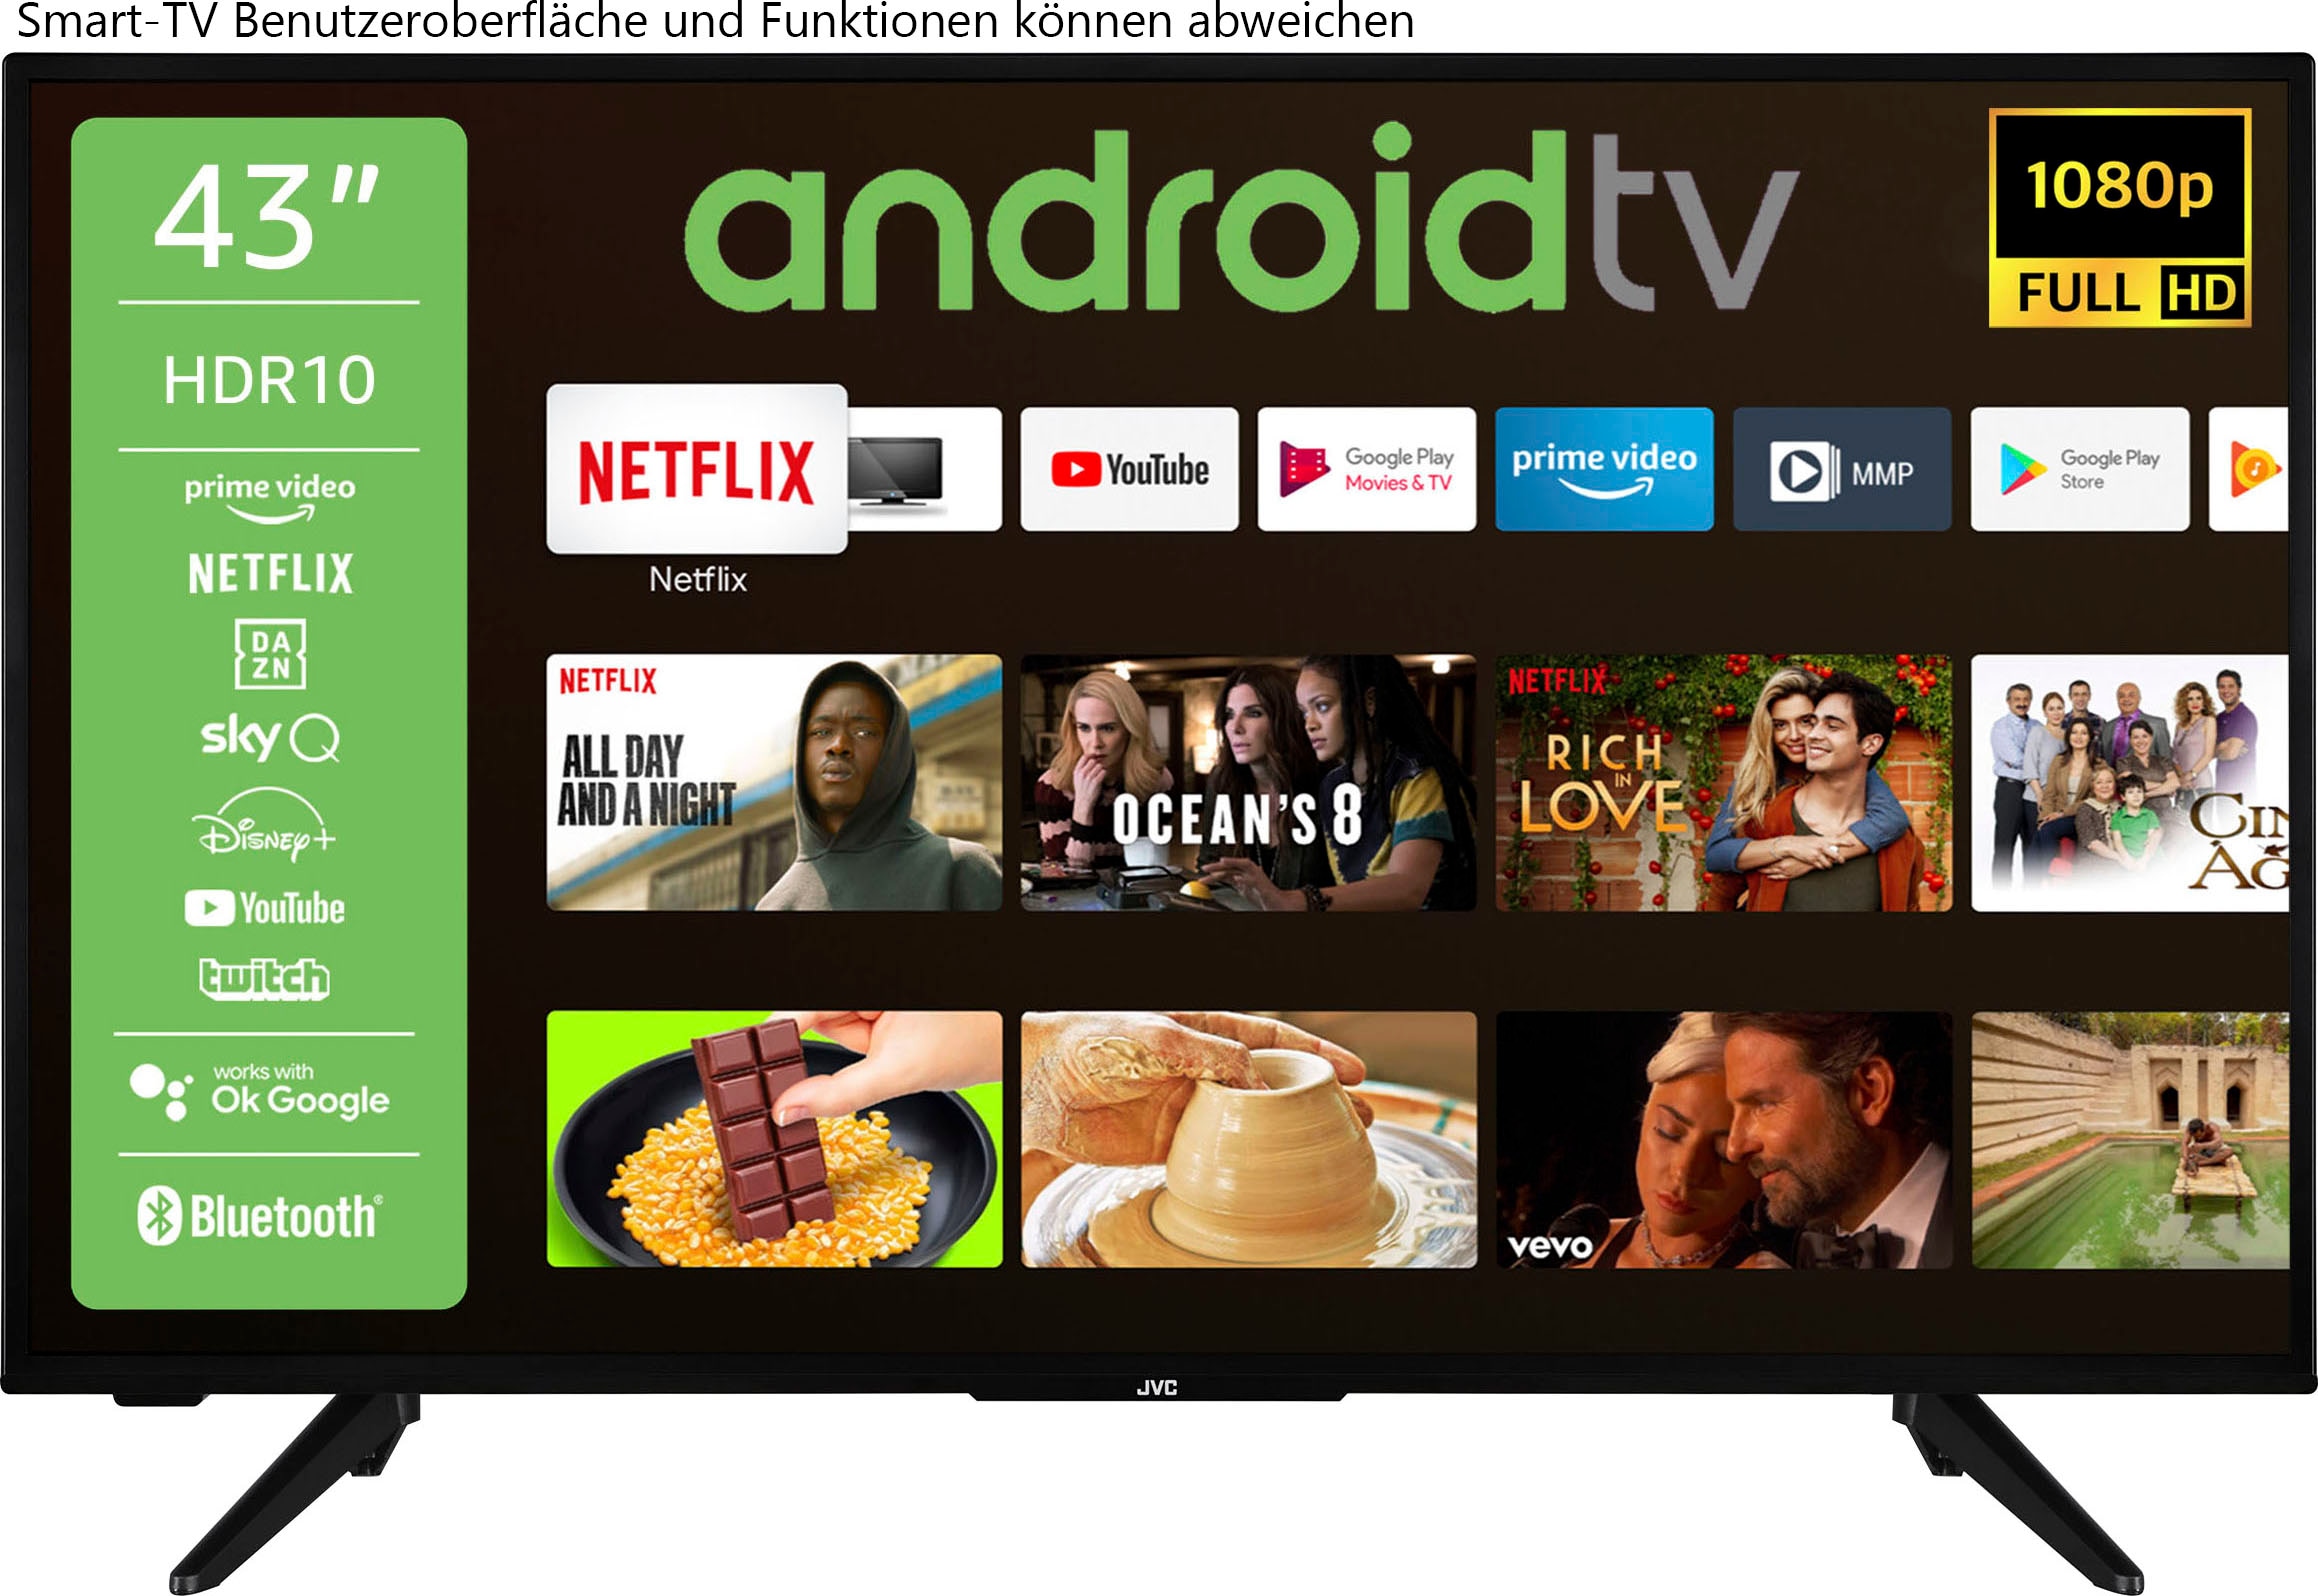 LED-Fernseher, 108 cm/43 Zoll, Full HD, Android TV